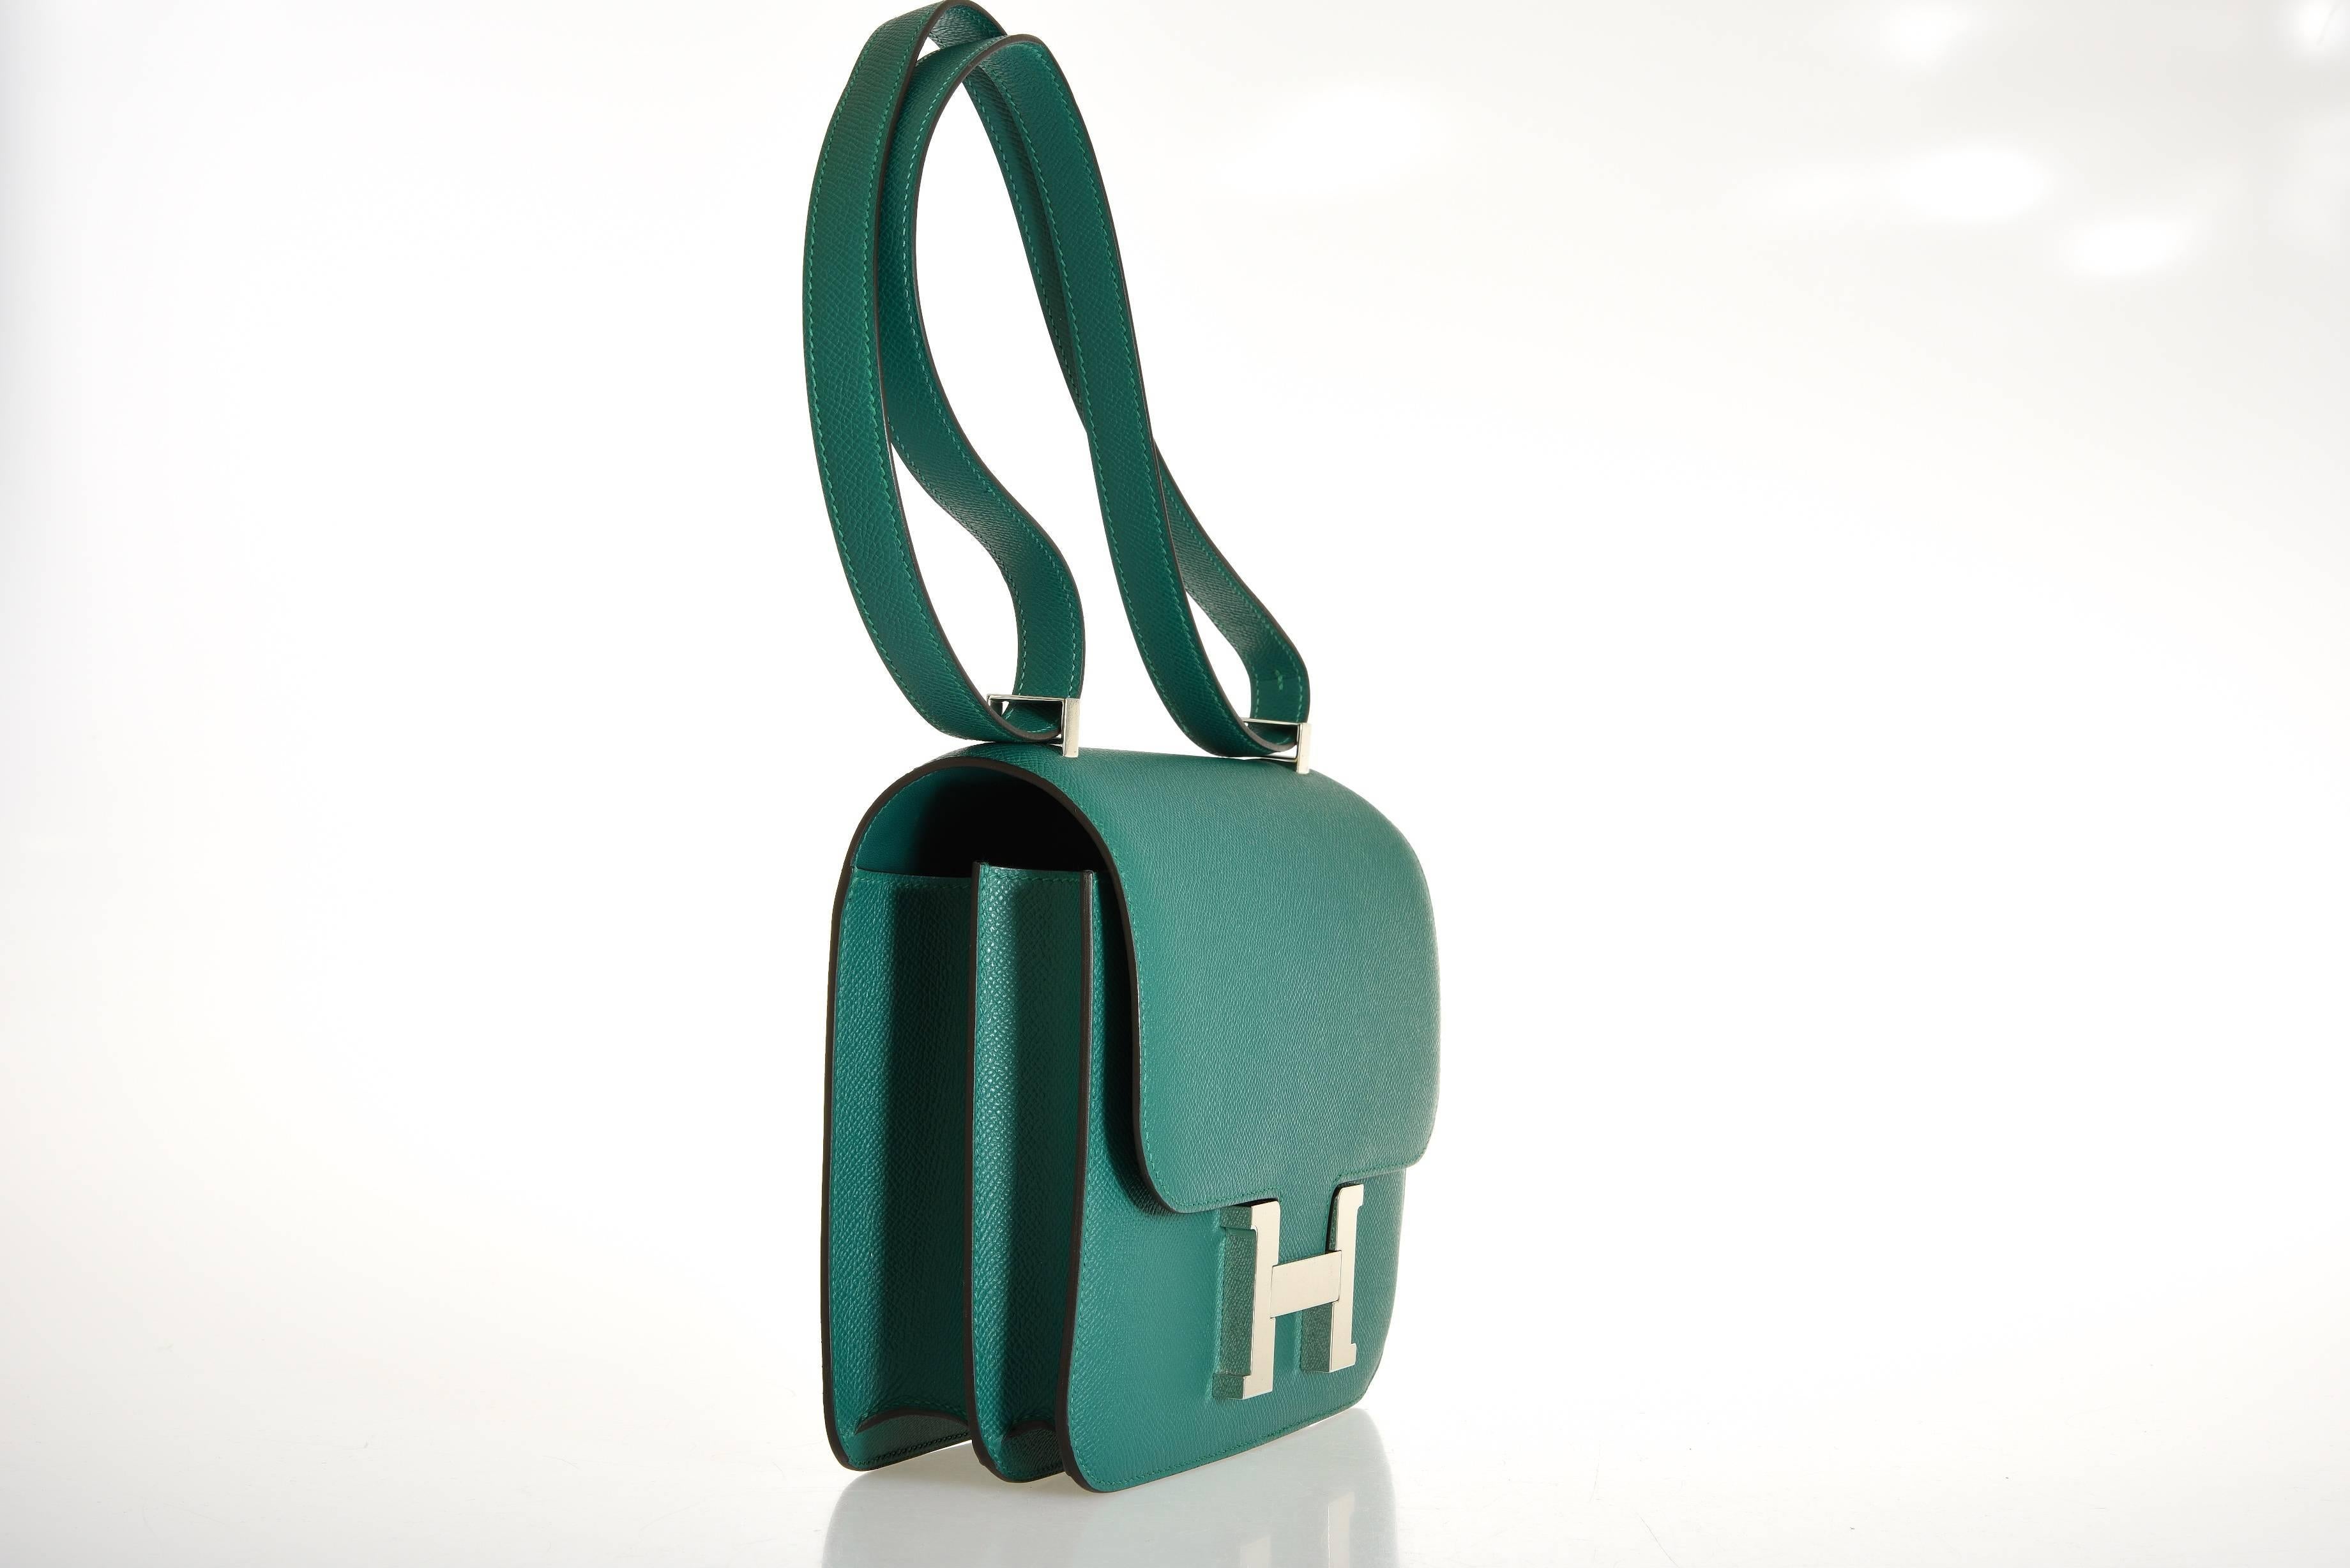 New Condition

Hermes Constance in a PERFECT size 24cm! 
Very rare to find this bag in Epsom and the stunning Jewel Malachite color. Actually big enough for everyday use. Comfy double strap that is perfect to carry cross body!

Hardware: